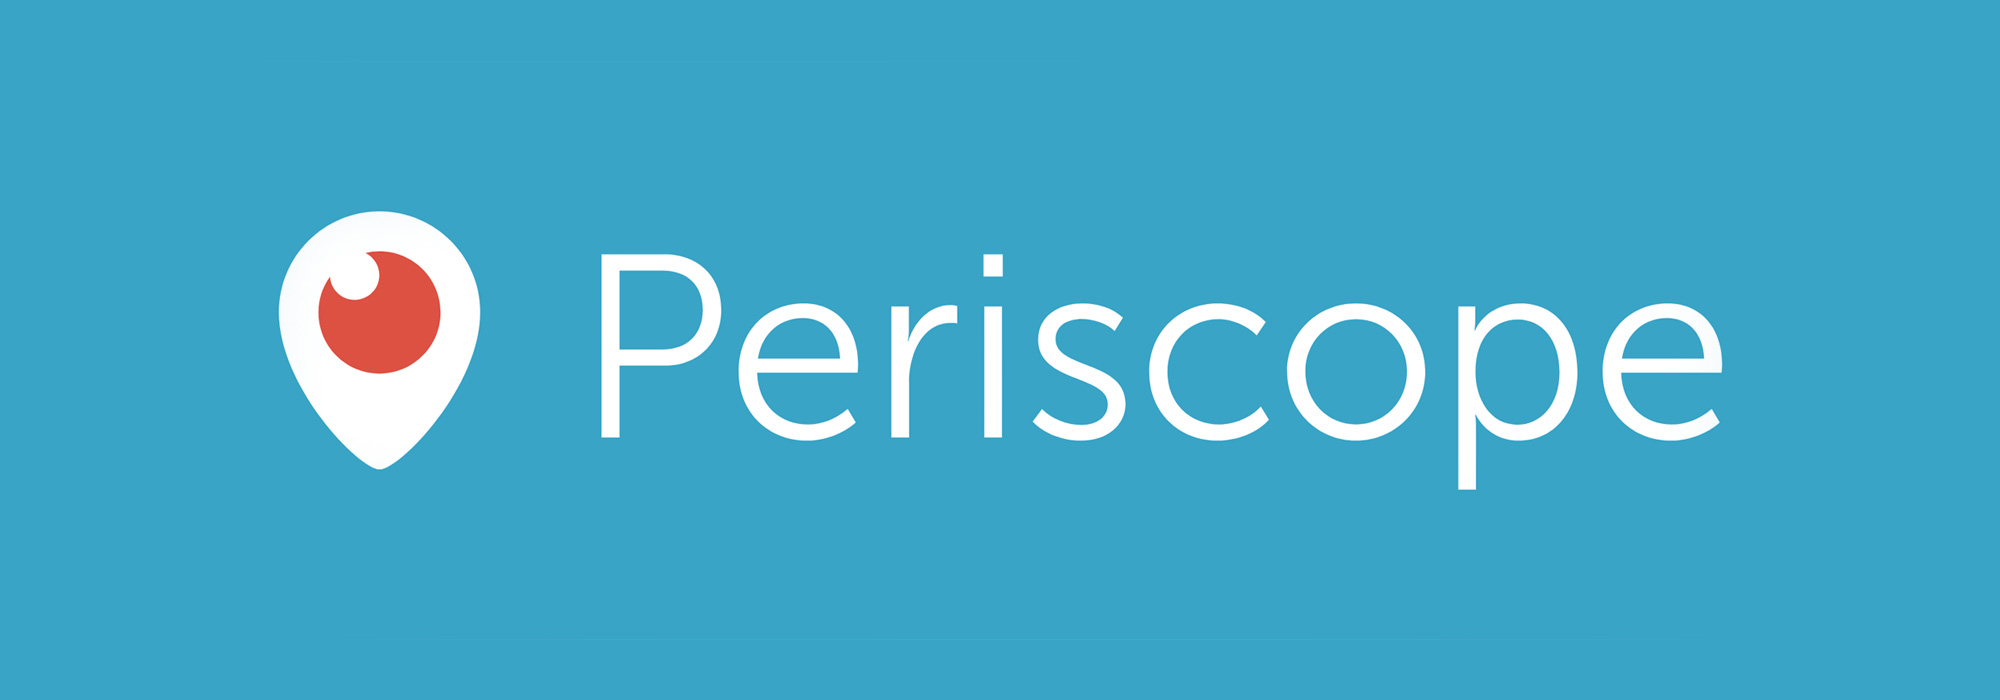 Twitter’s Periscope: A New Way to Build Your Brand